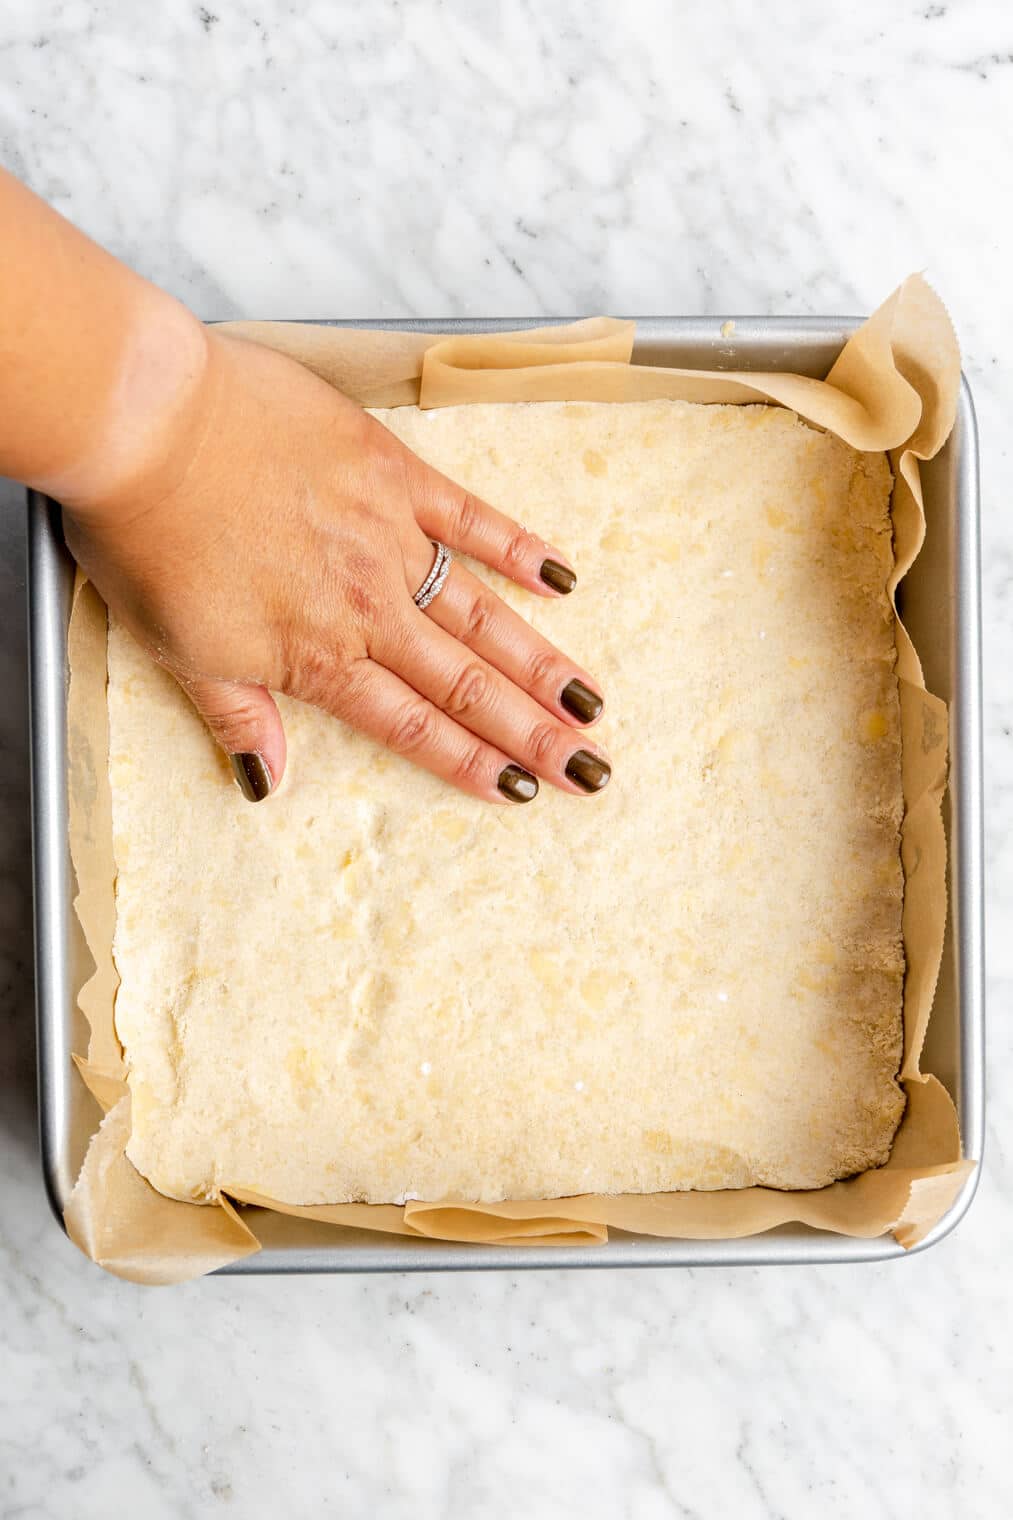 Hand pressing shortbread into an 8x8 baking pan lined with parchment paper.